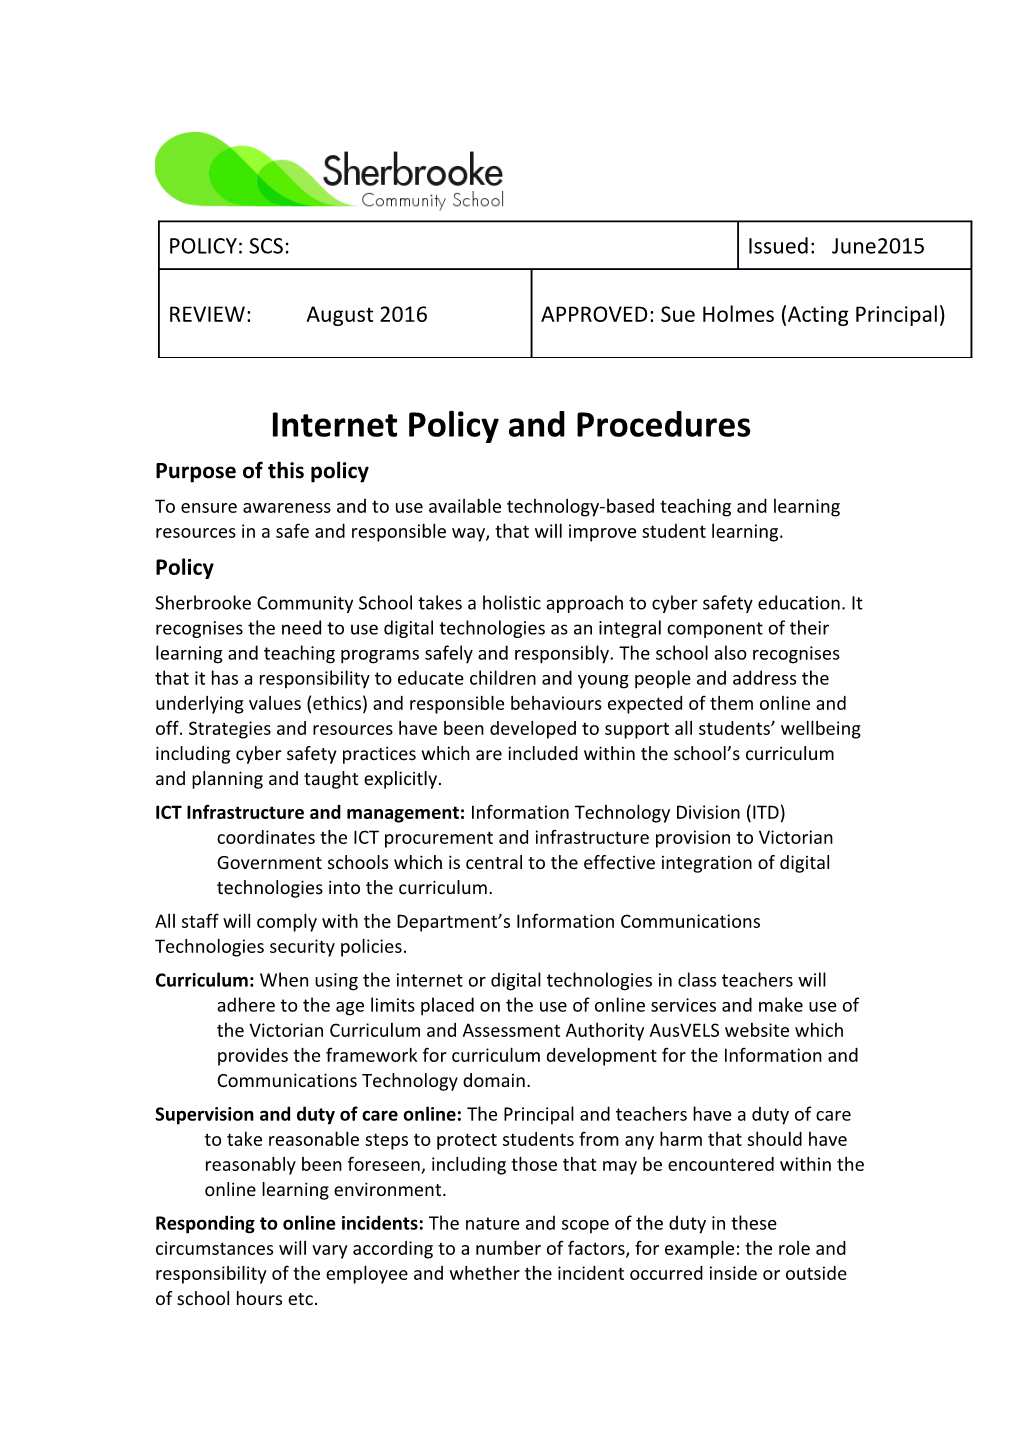 Internet Policy and Procedures